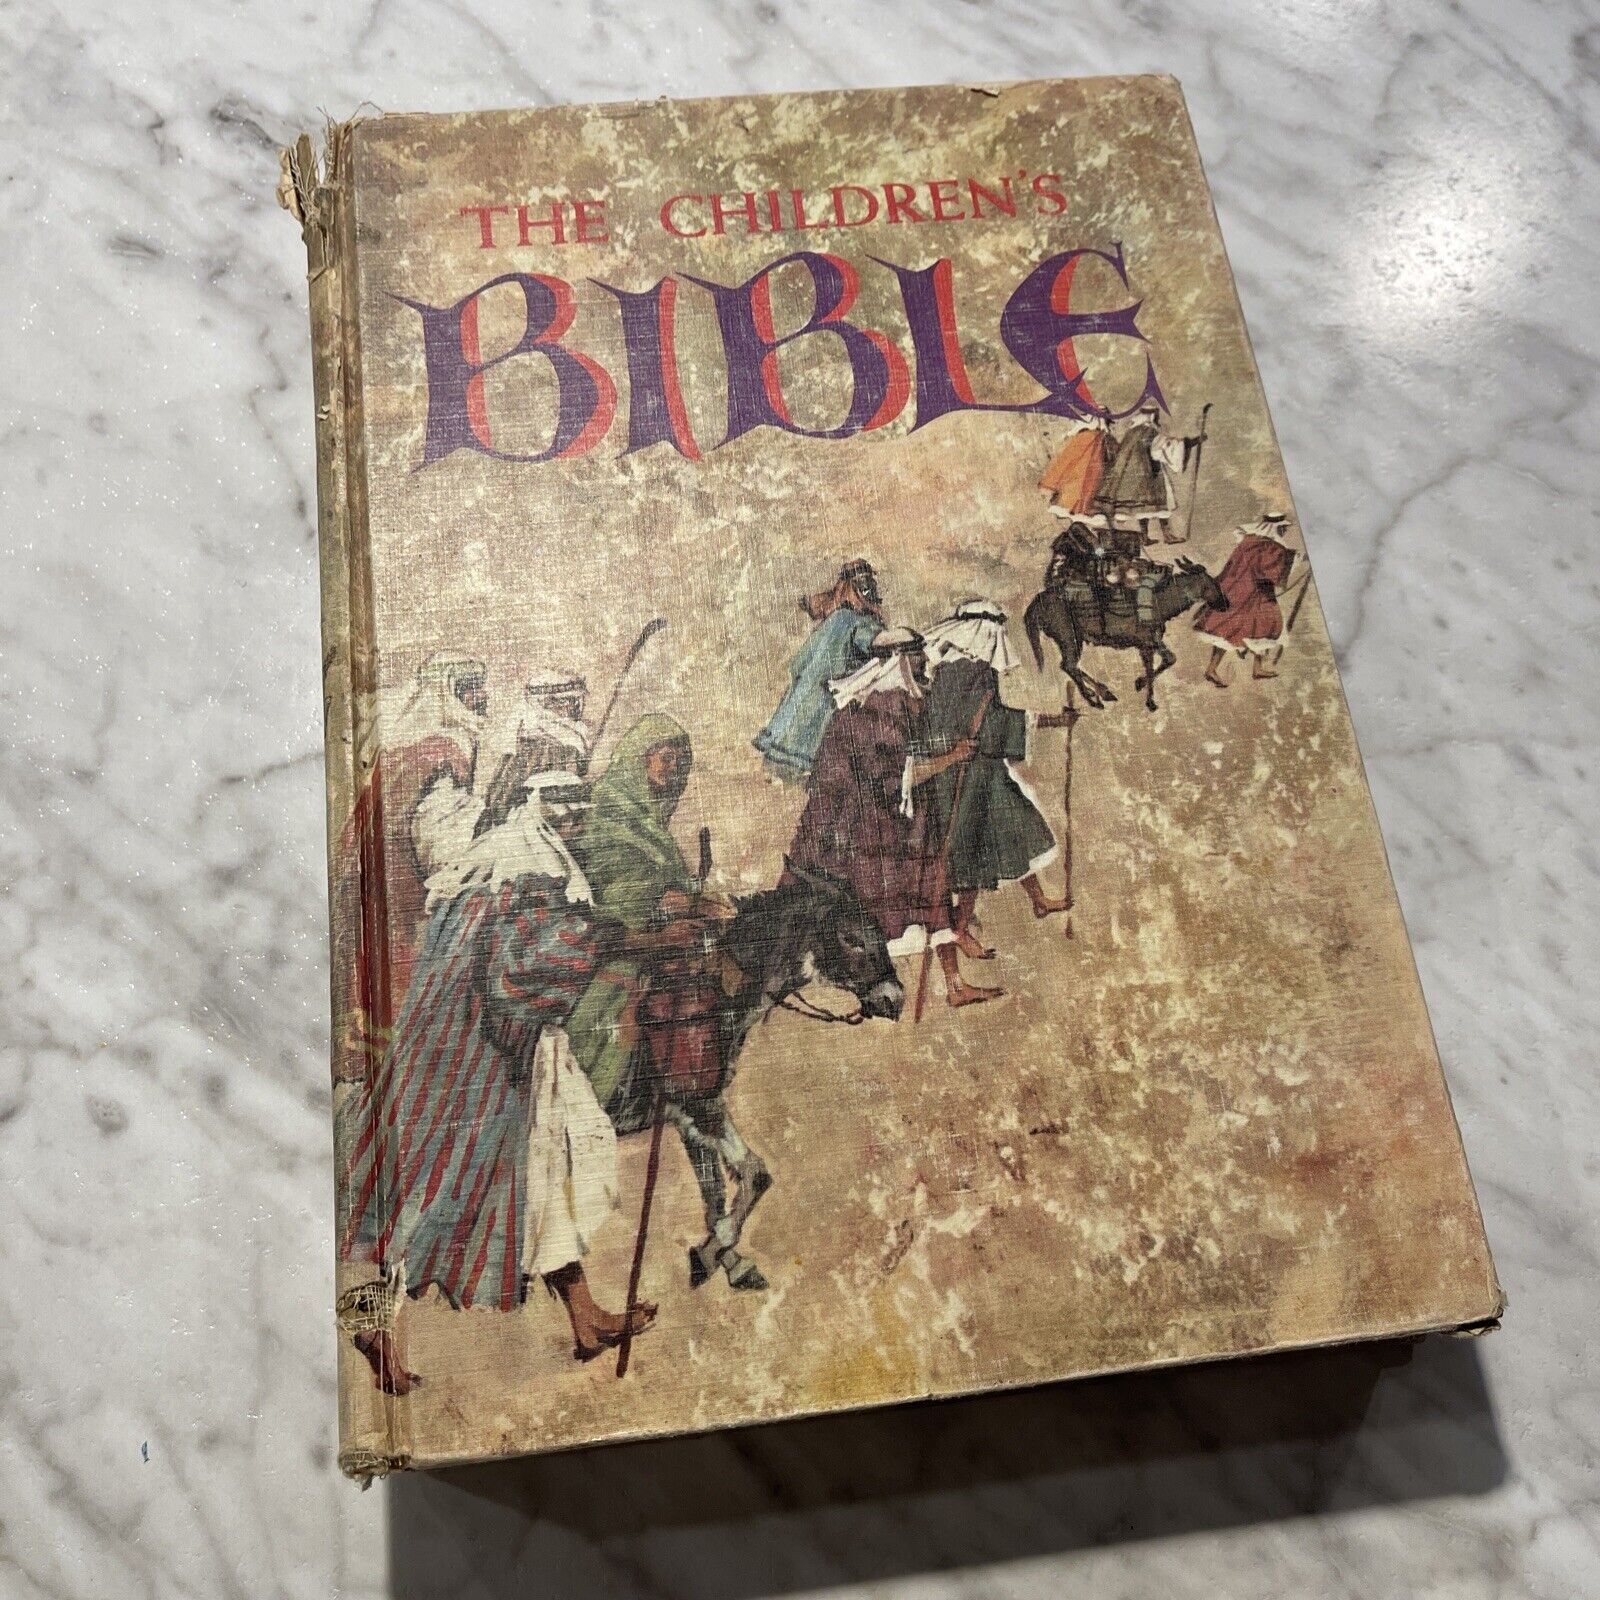 THE CHILDREN'S BIBLE by Golden Press - 1965 - Full-Color Illustrations